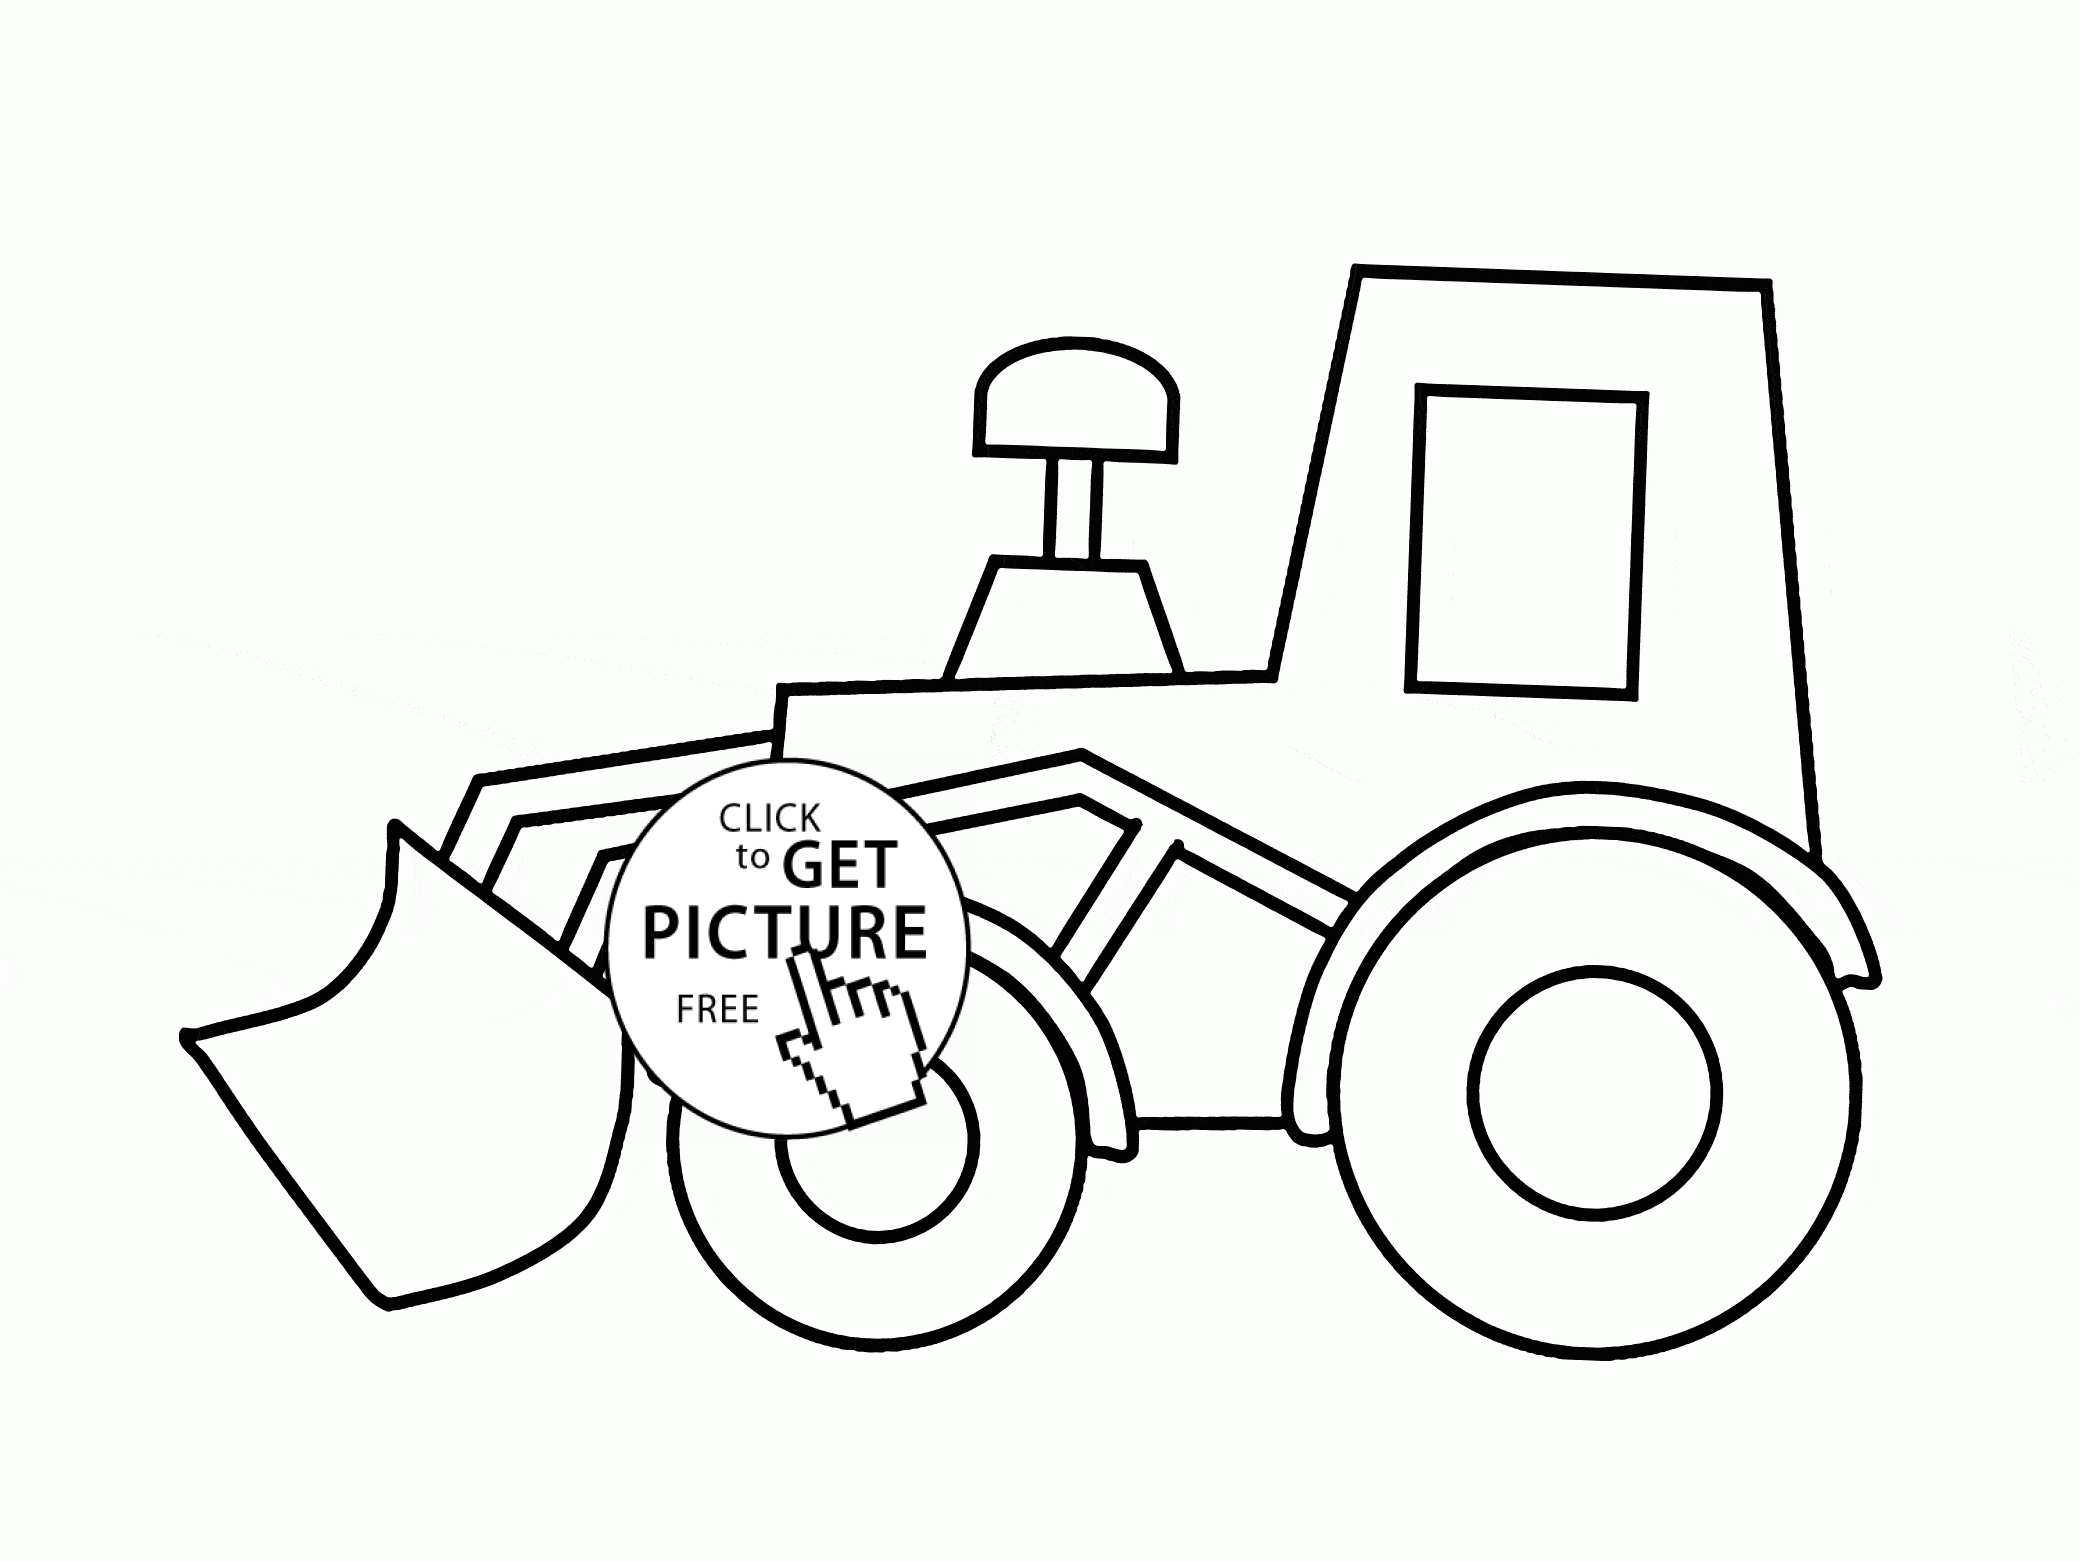 Simple Excavator coloring page for kids, transportation coloring pages  printables free - Wupps… | Coloring pages for kids, Truck coloring pages,  Easy coloring pages